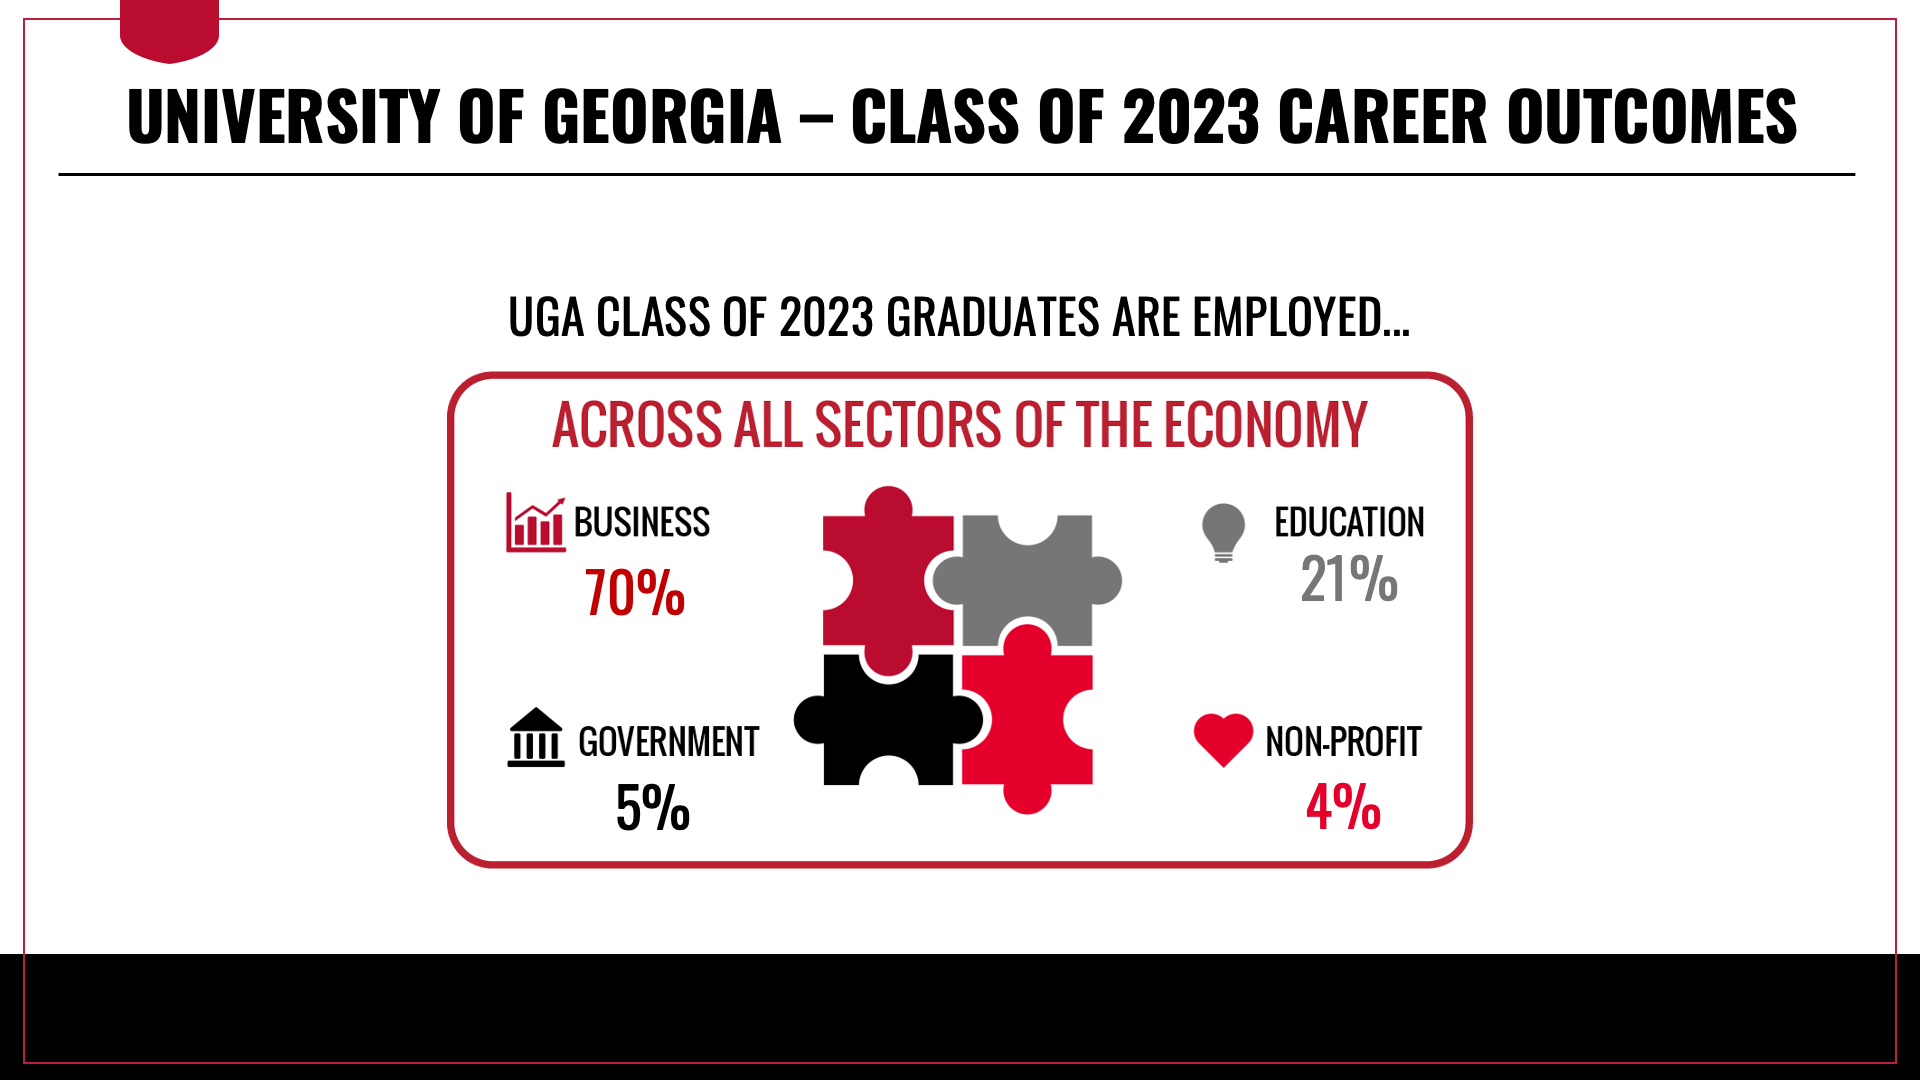 UGA Class of 2023 graduates are working across all sectors of the economy. 70 percent of full-time employed graduates are working in the business sector, 21 percent are working in the education sector, 5 percent are working in the government sector and 4 percent are working in the non-profit sector.